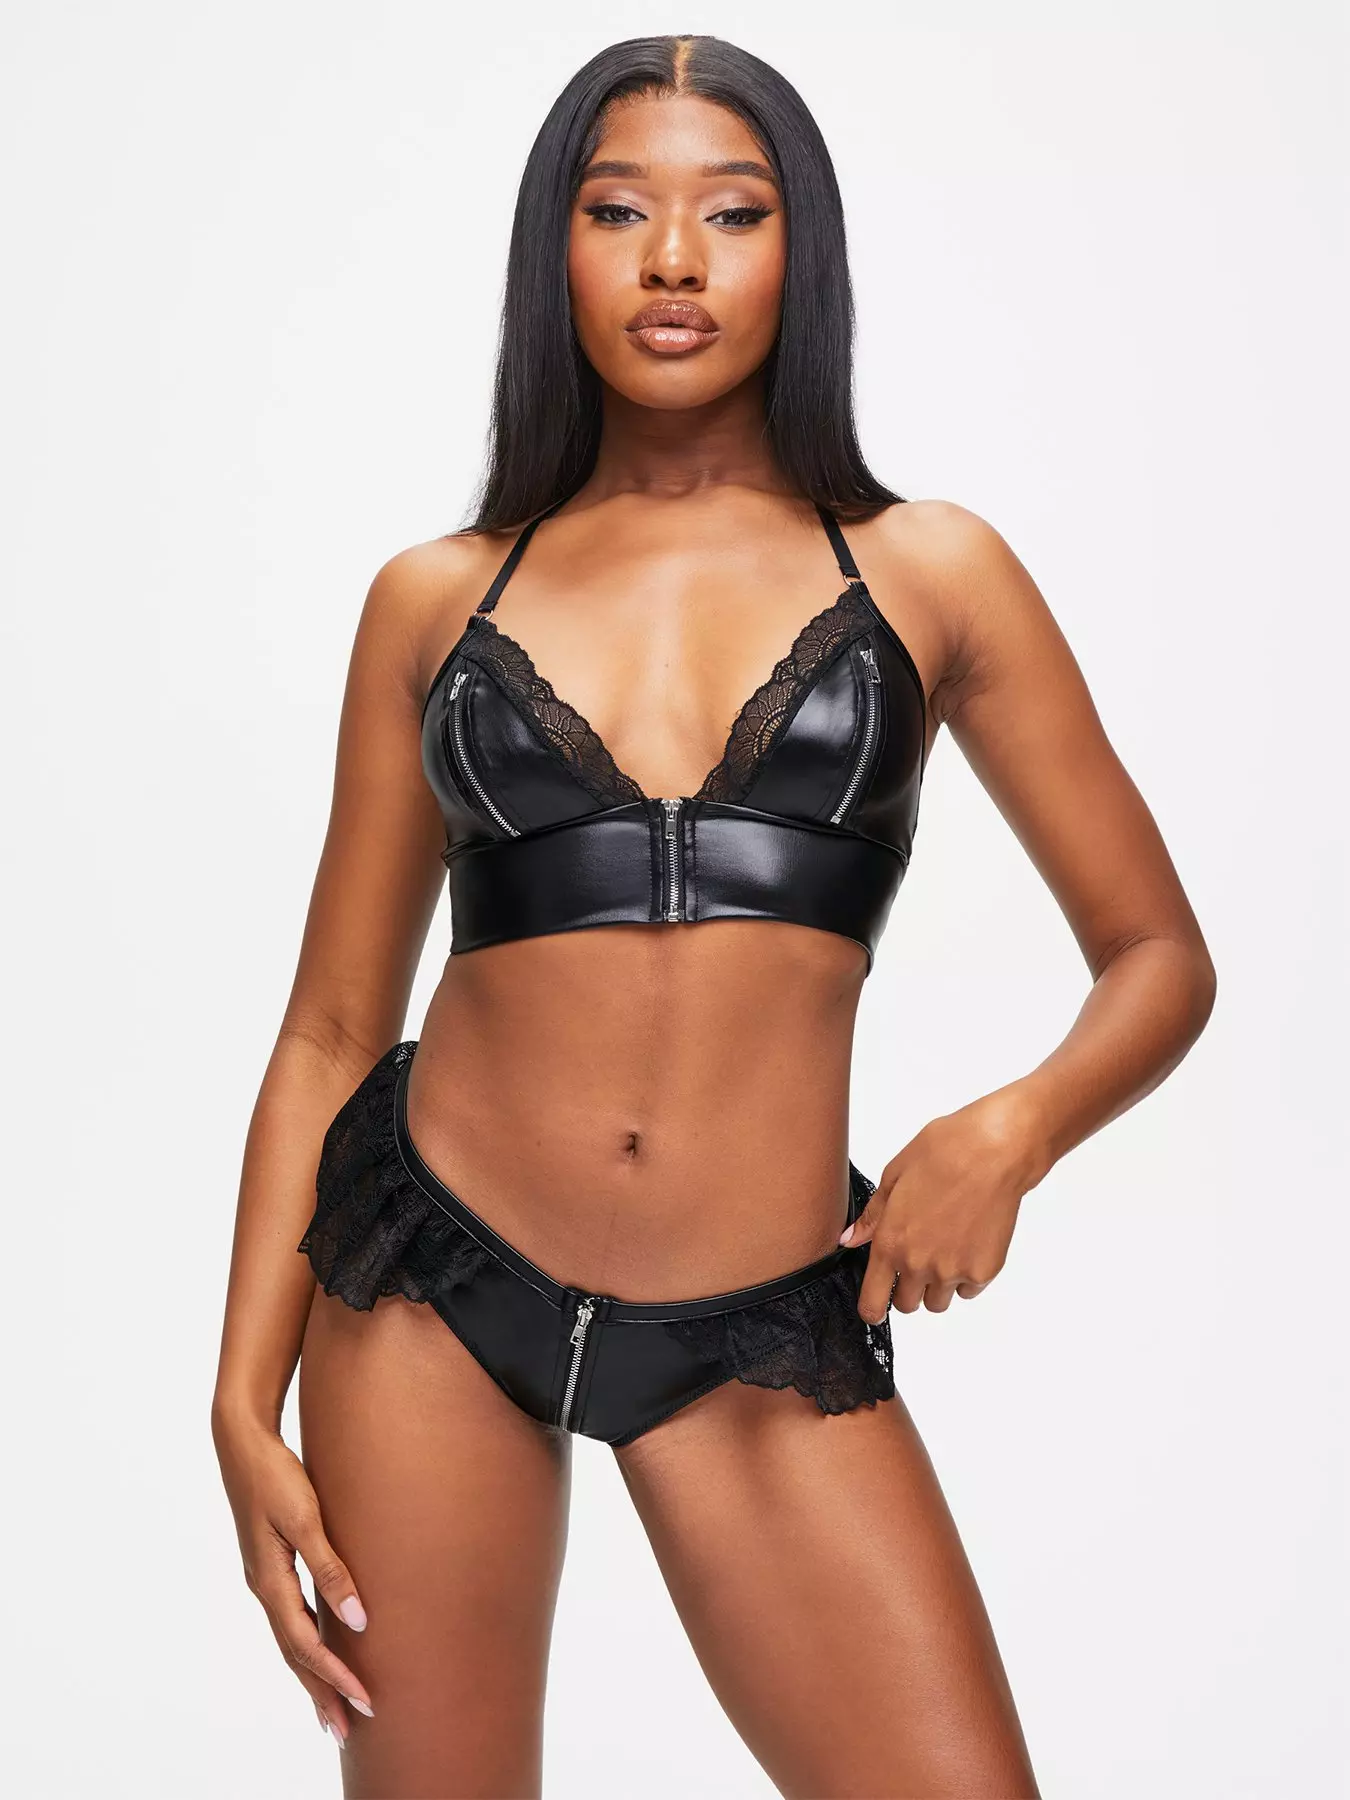 Asos' lingerie appearing in womens' Instagram feeds looks crotch-less